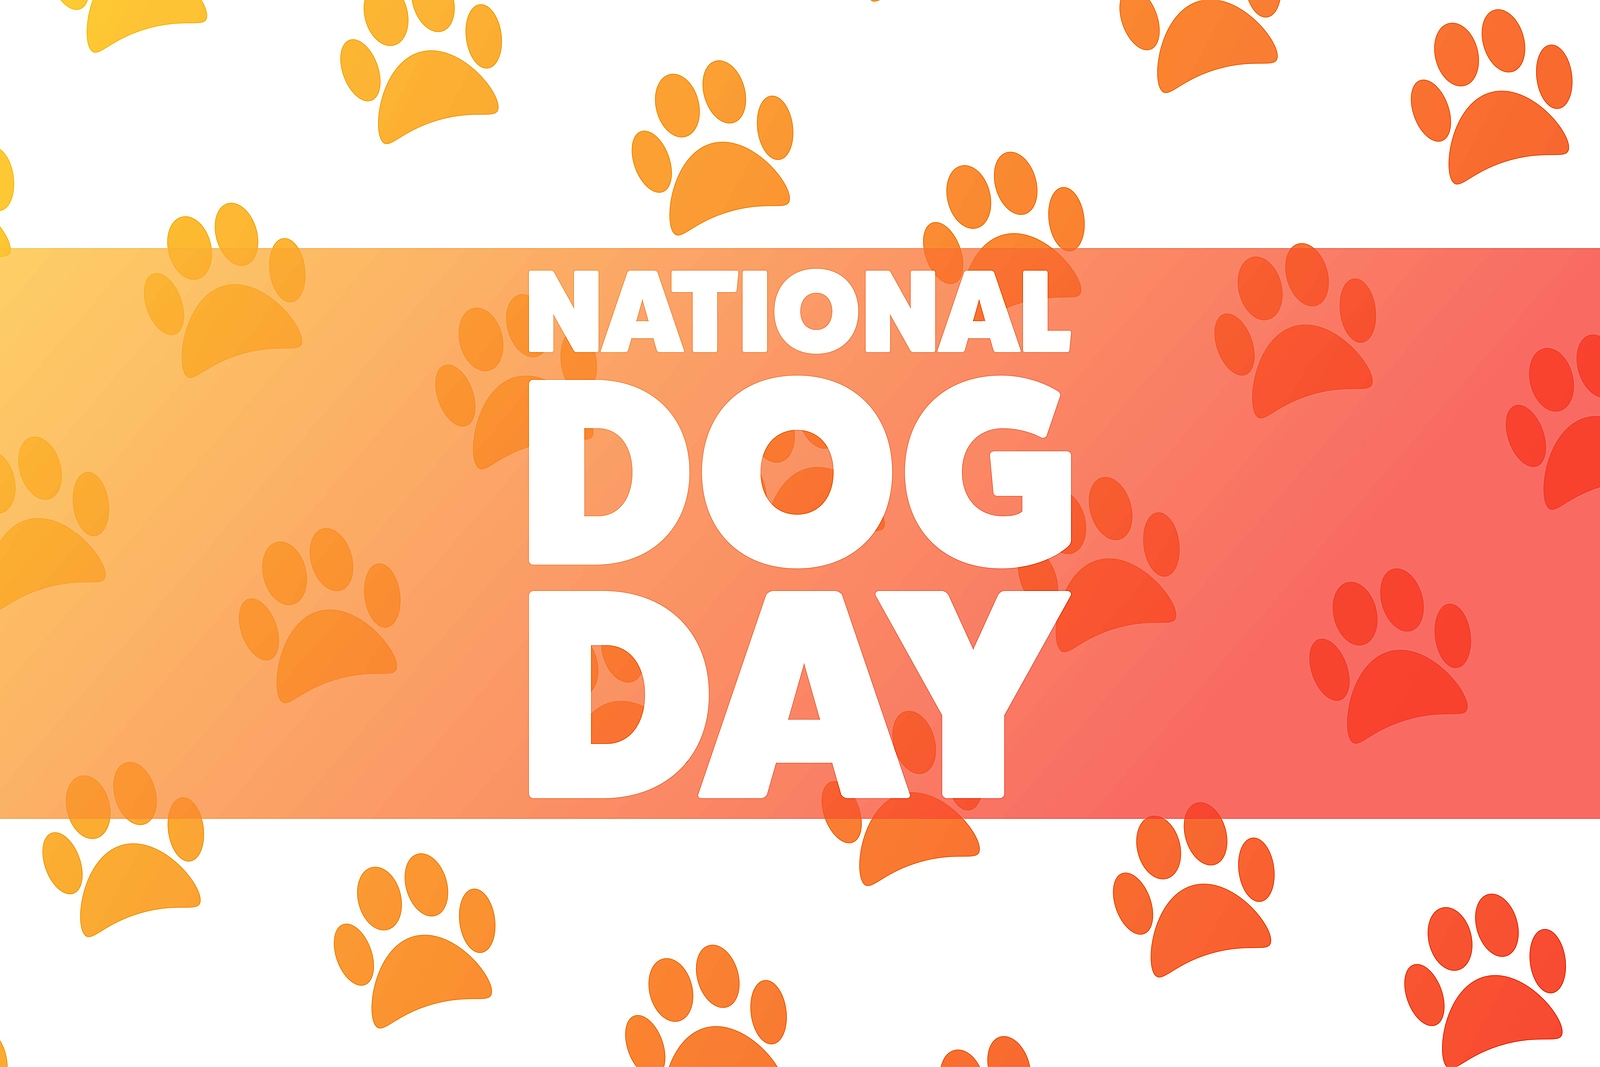 National Dog Day. August 26.